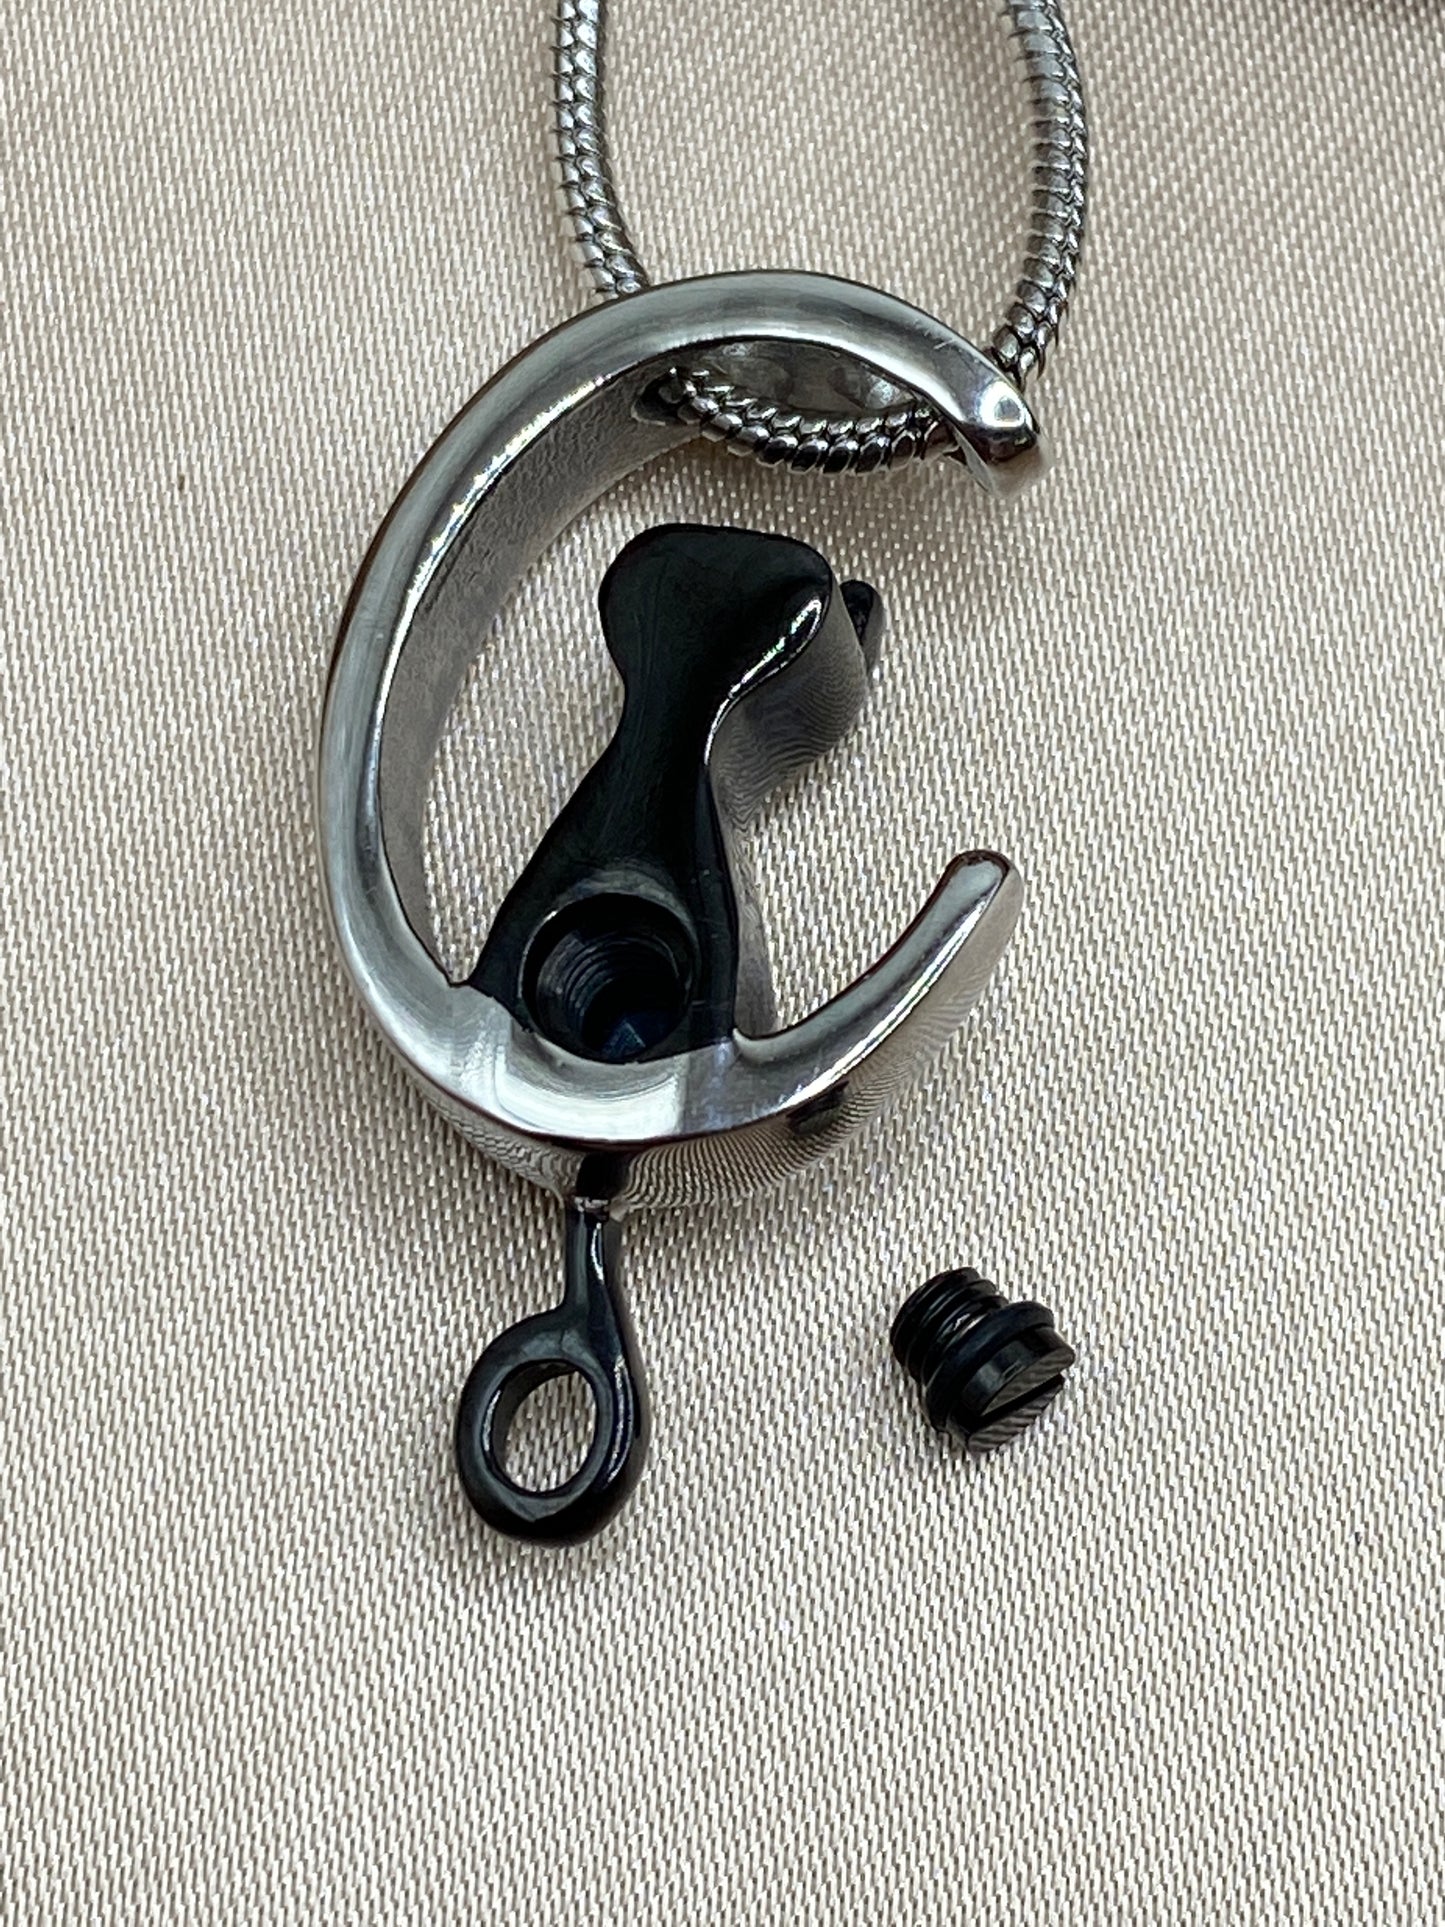 Openable cremation pendant holds pet ashes